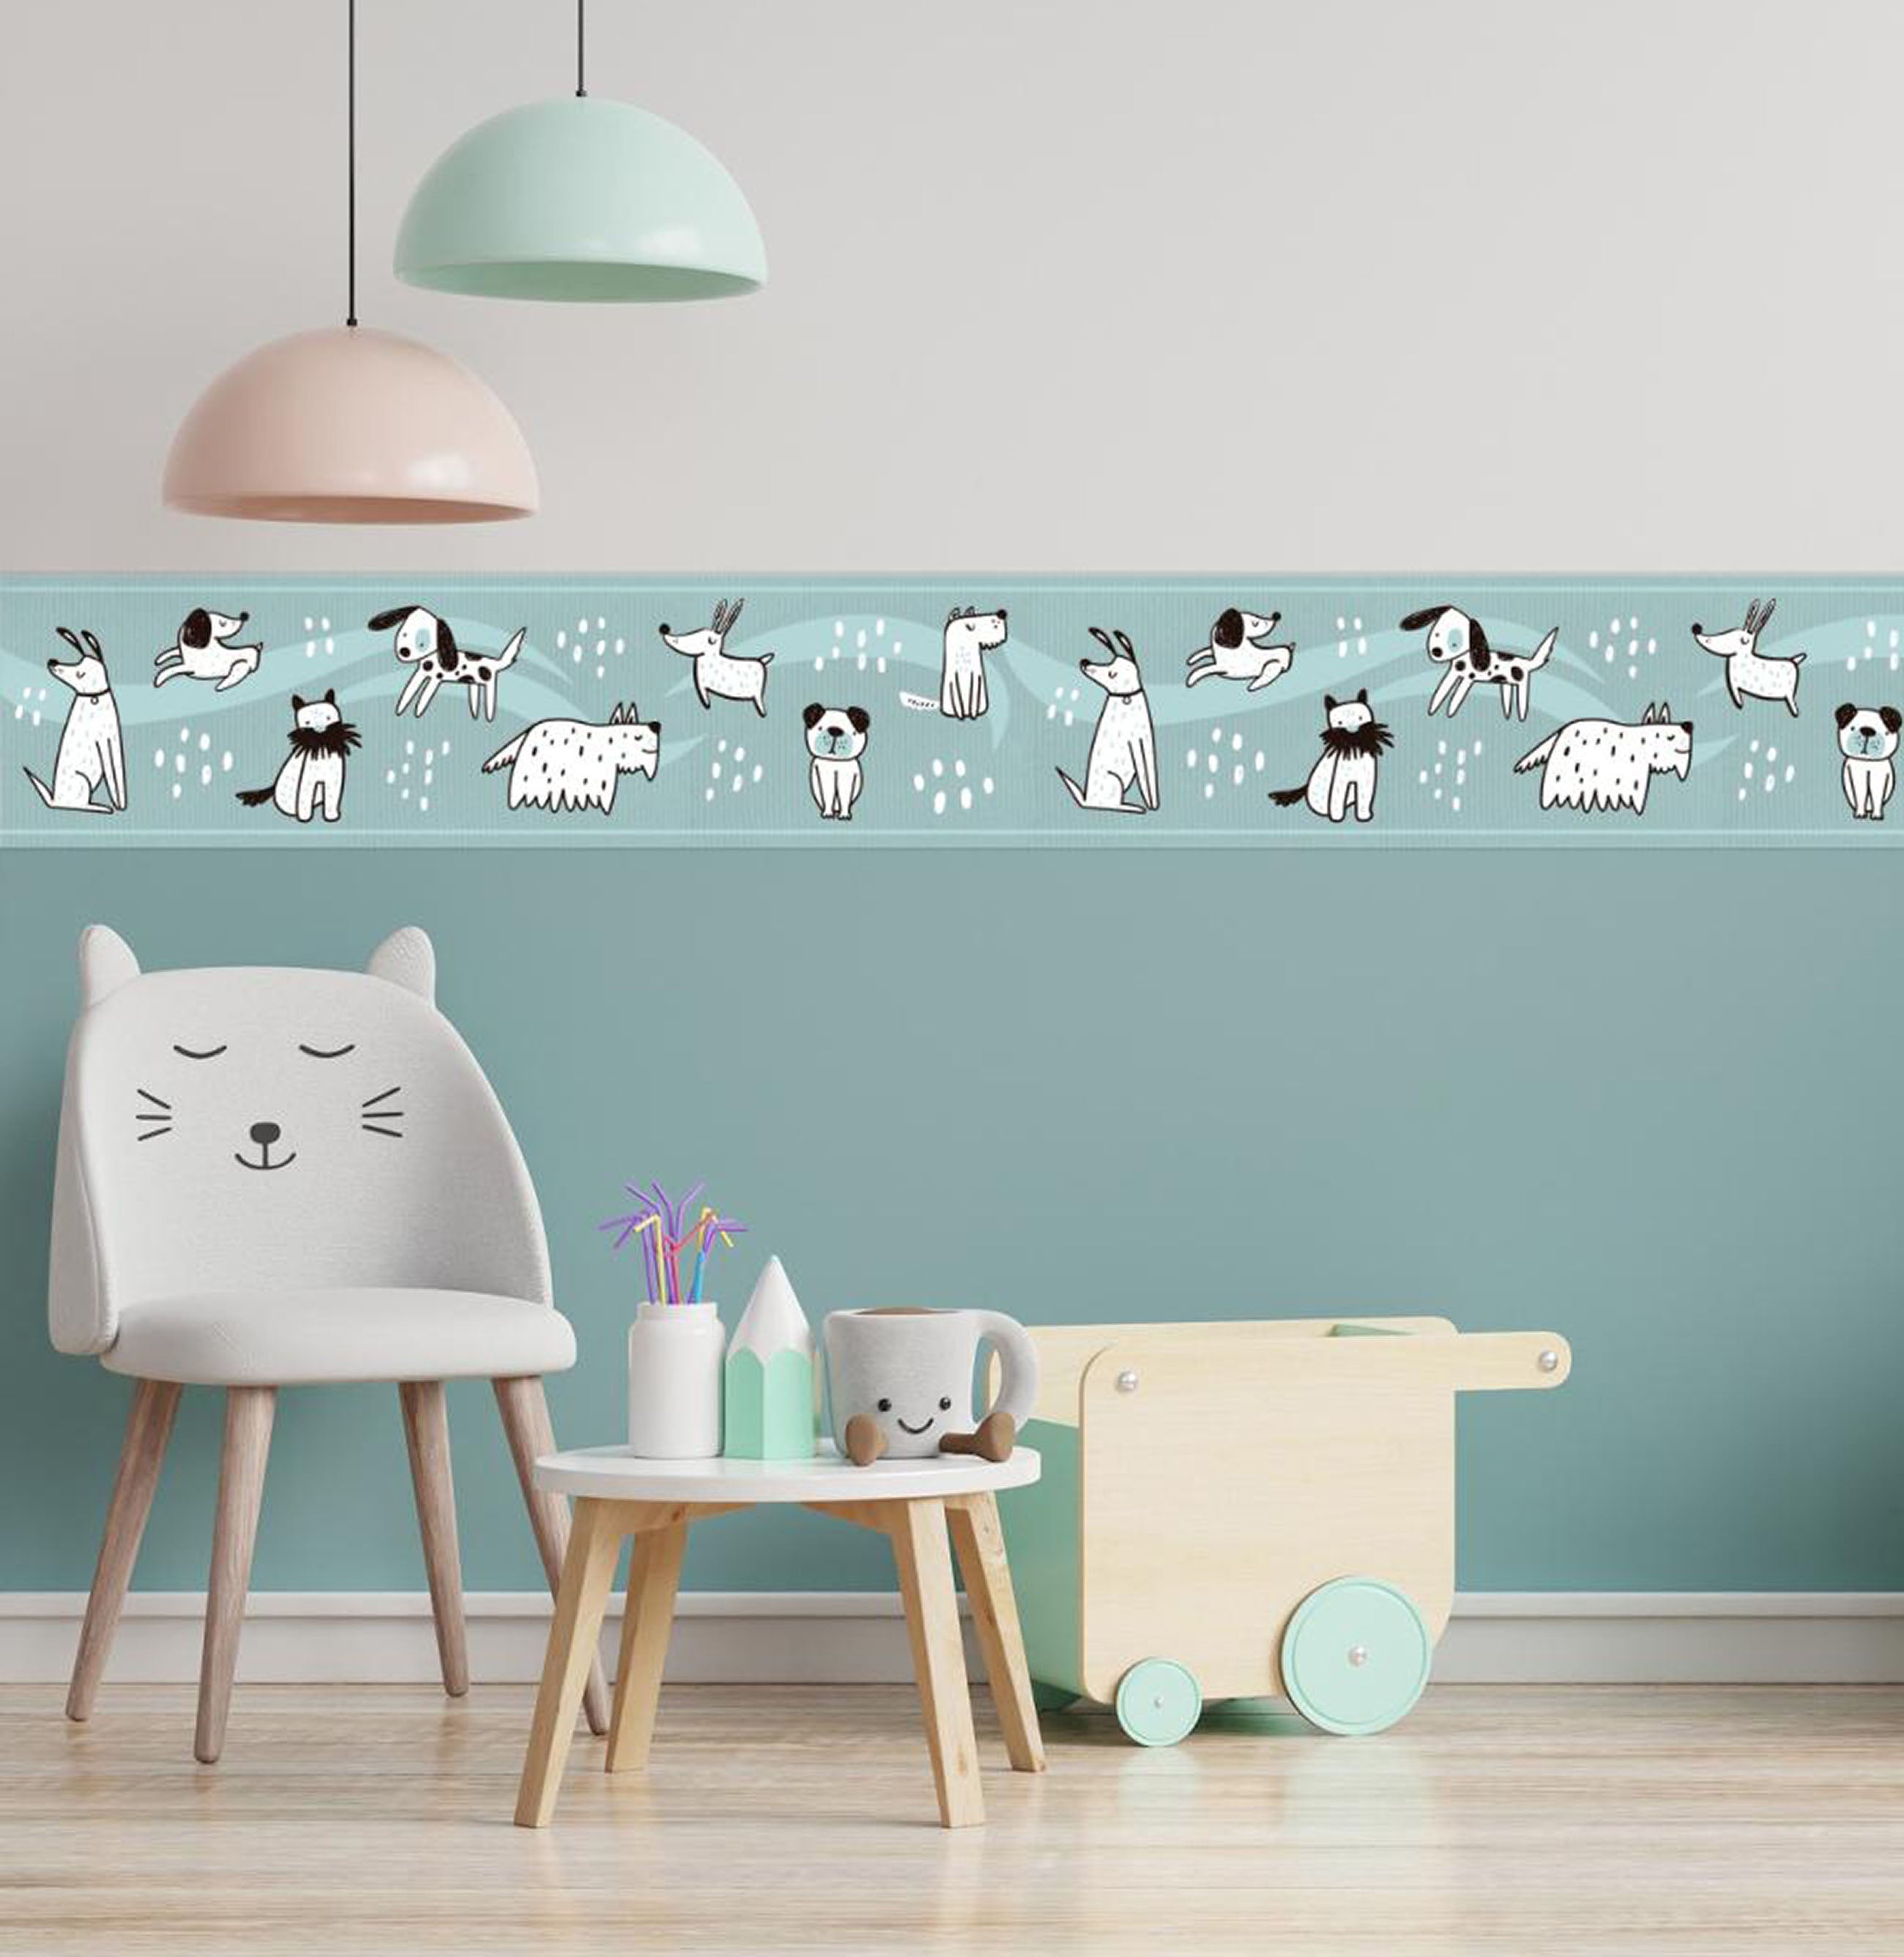 GB90190g8 Grace & Gardenia Hand Drawn Dogs Peel and Stick Wallpaper Border 8in Height x 18ft Long, Blue White Black